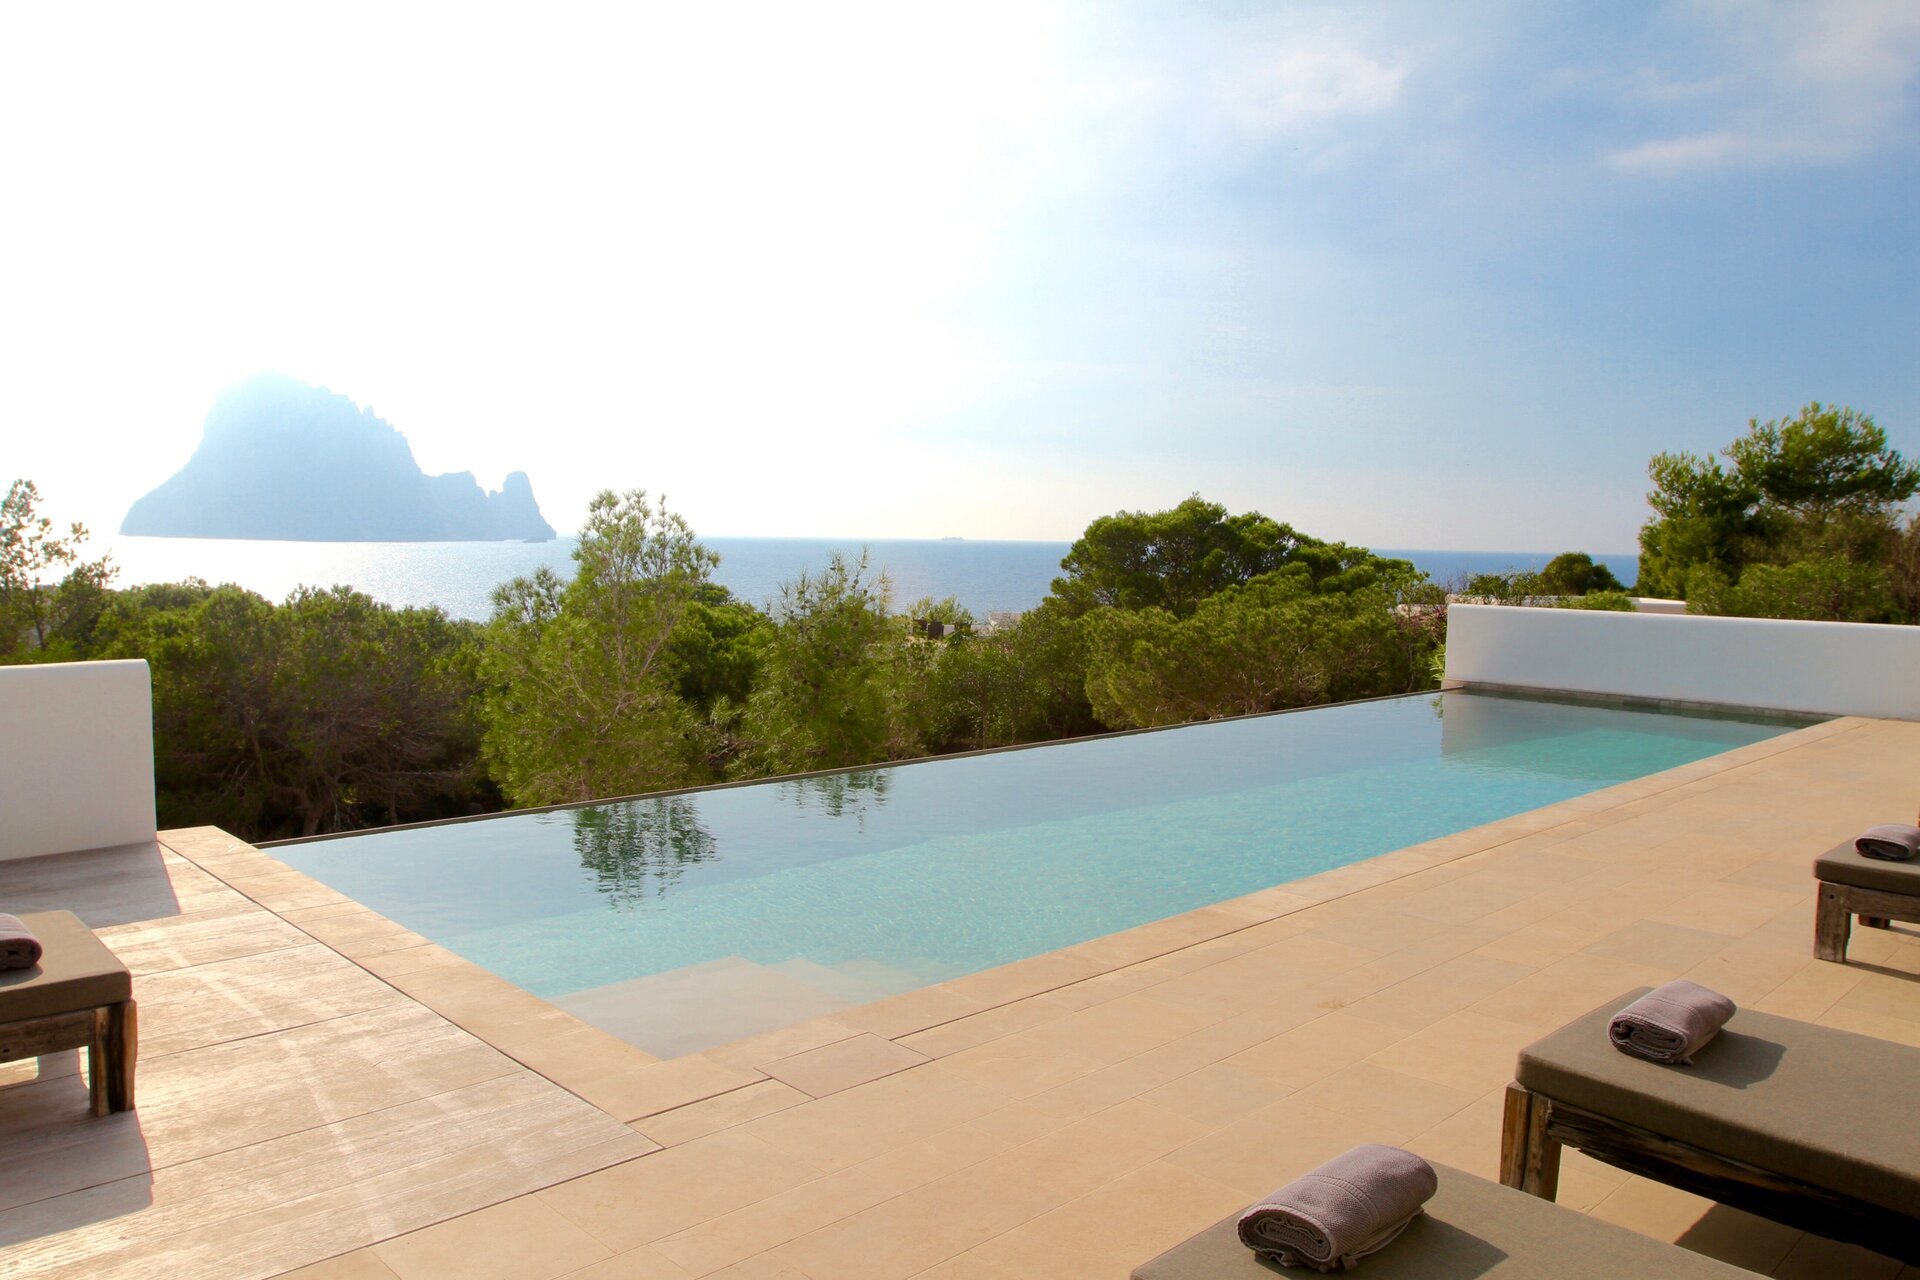 Property Image 2 - Rent this Luxury Villa with Private Pool, Ibiza Villa 1301